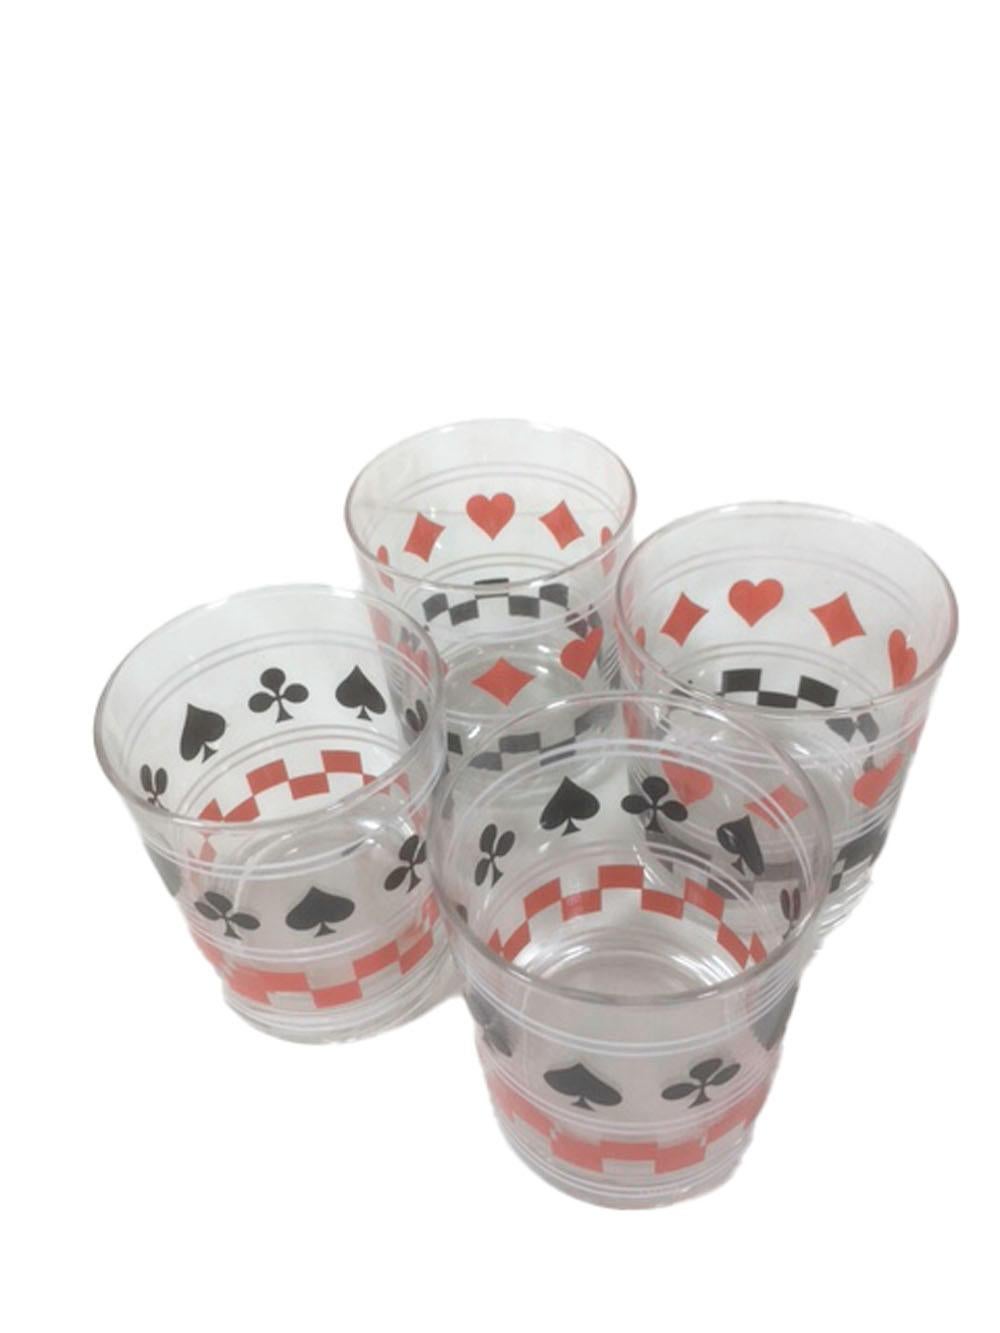 Art Deco set of 4 old fashioned or rocks glasses with a playing card motif. Two have spades and clubs alternating around the top half with a red check band around the bottom, while the other two have hearts and diamonds around the top with a black